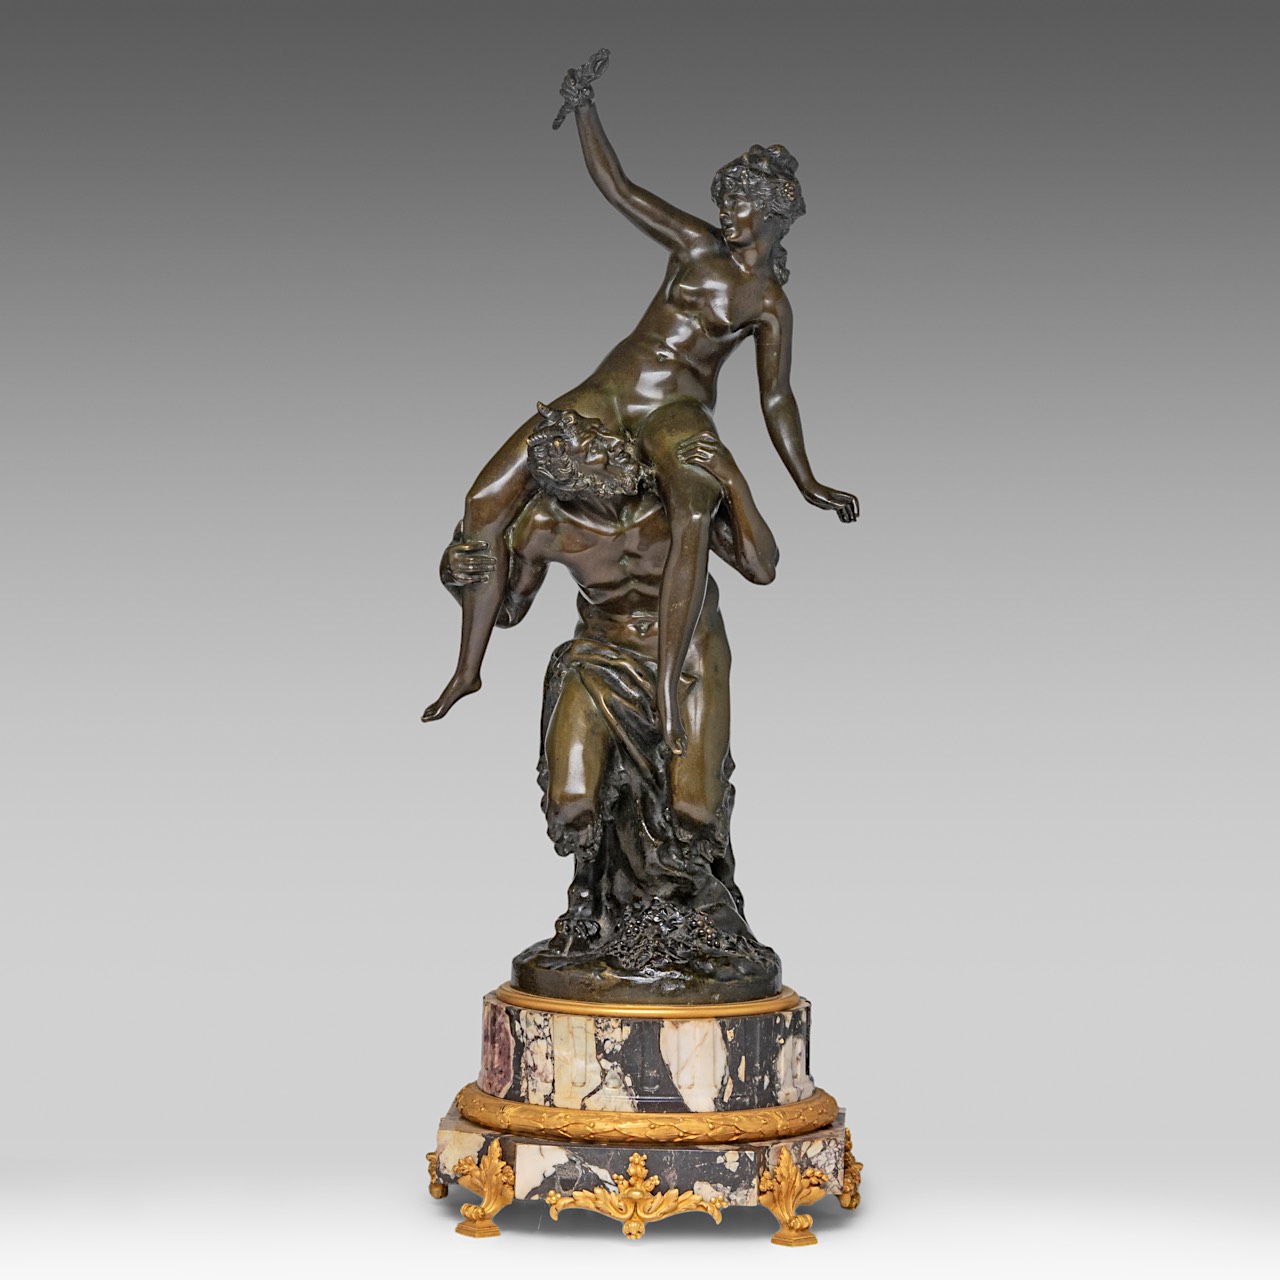 Clodion (1738-1814), Satyr and Nymph, patinated bronze on a marble base with gilt bronze mounts, H 6